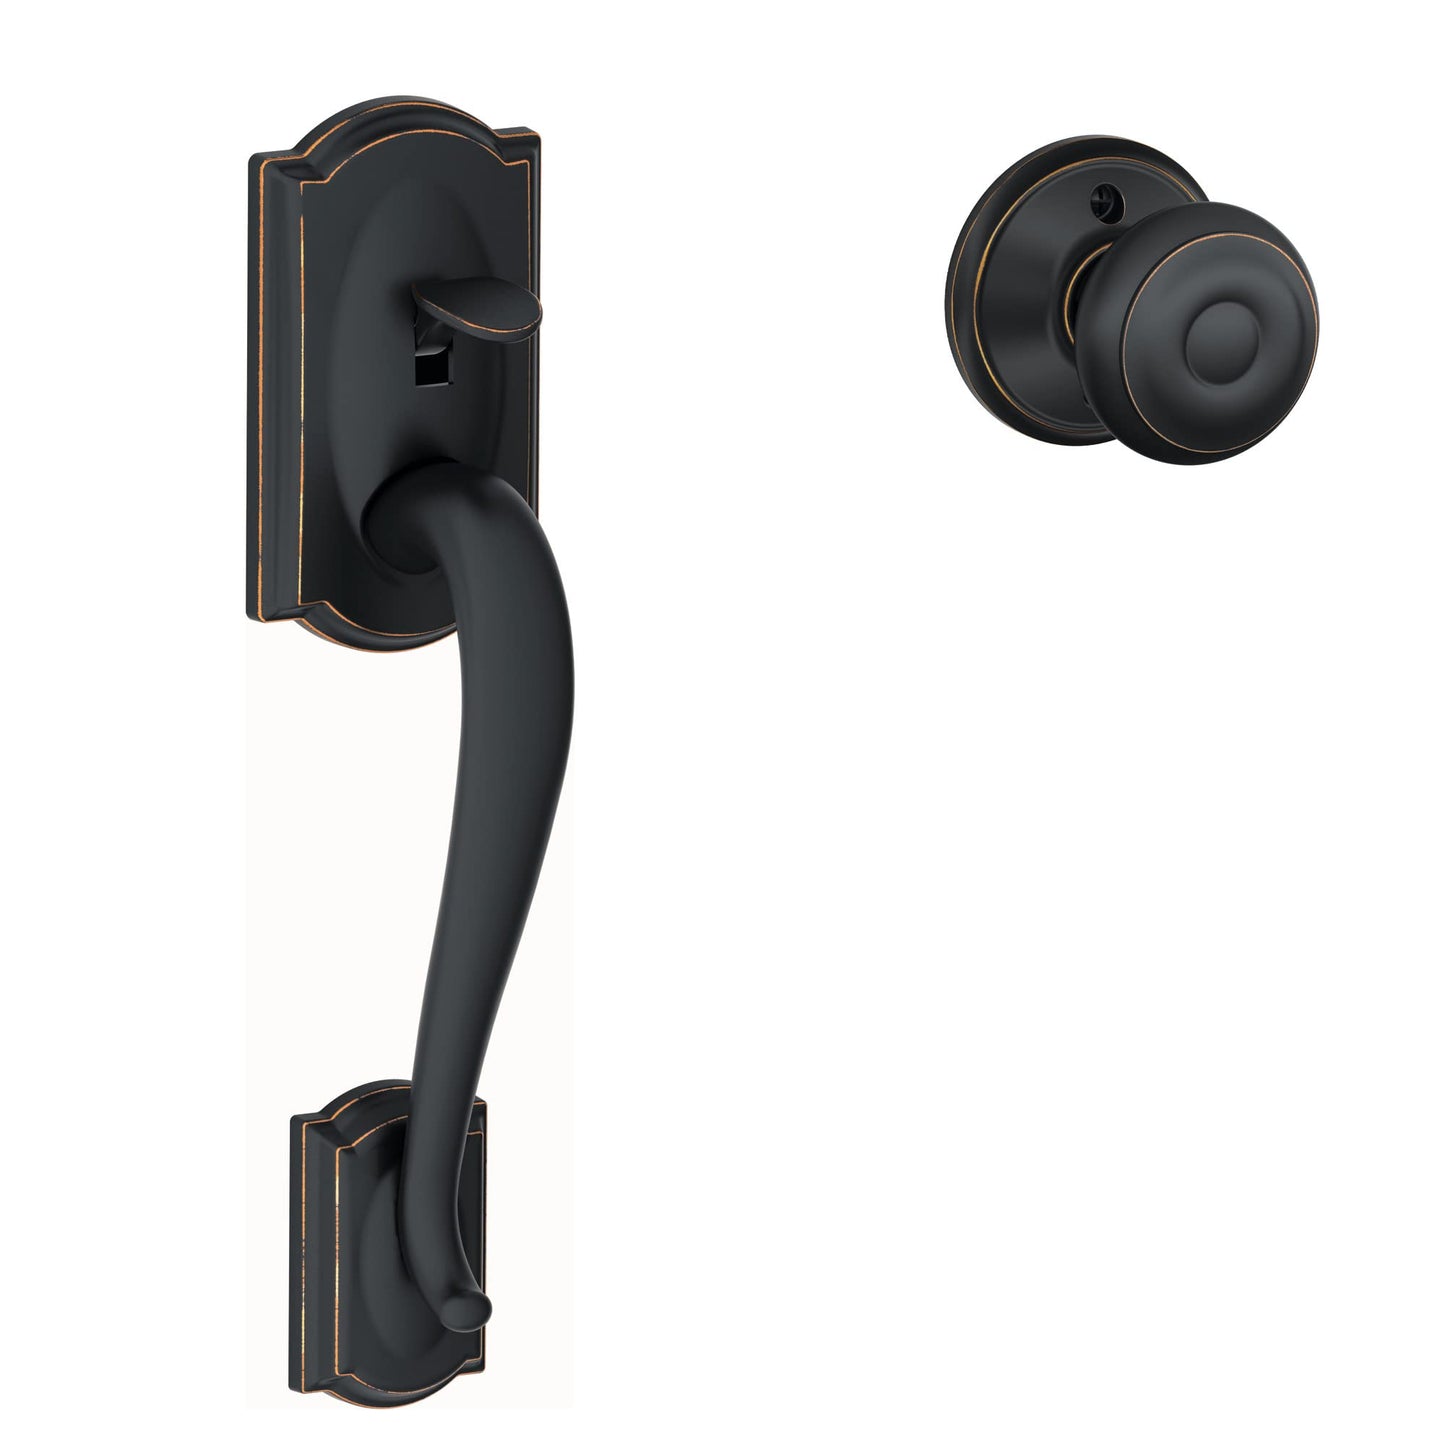 SCHLAGE FE285 CAM 622 Acc RH Camelot Trim Lower Half Front Entry Handleset with Accent Right Hand Lever, Matte Black